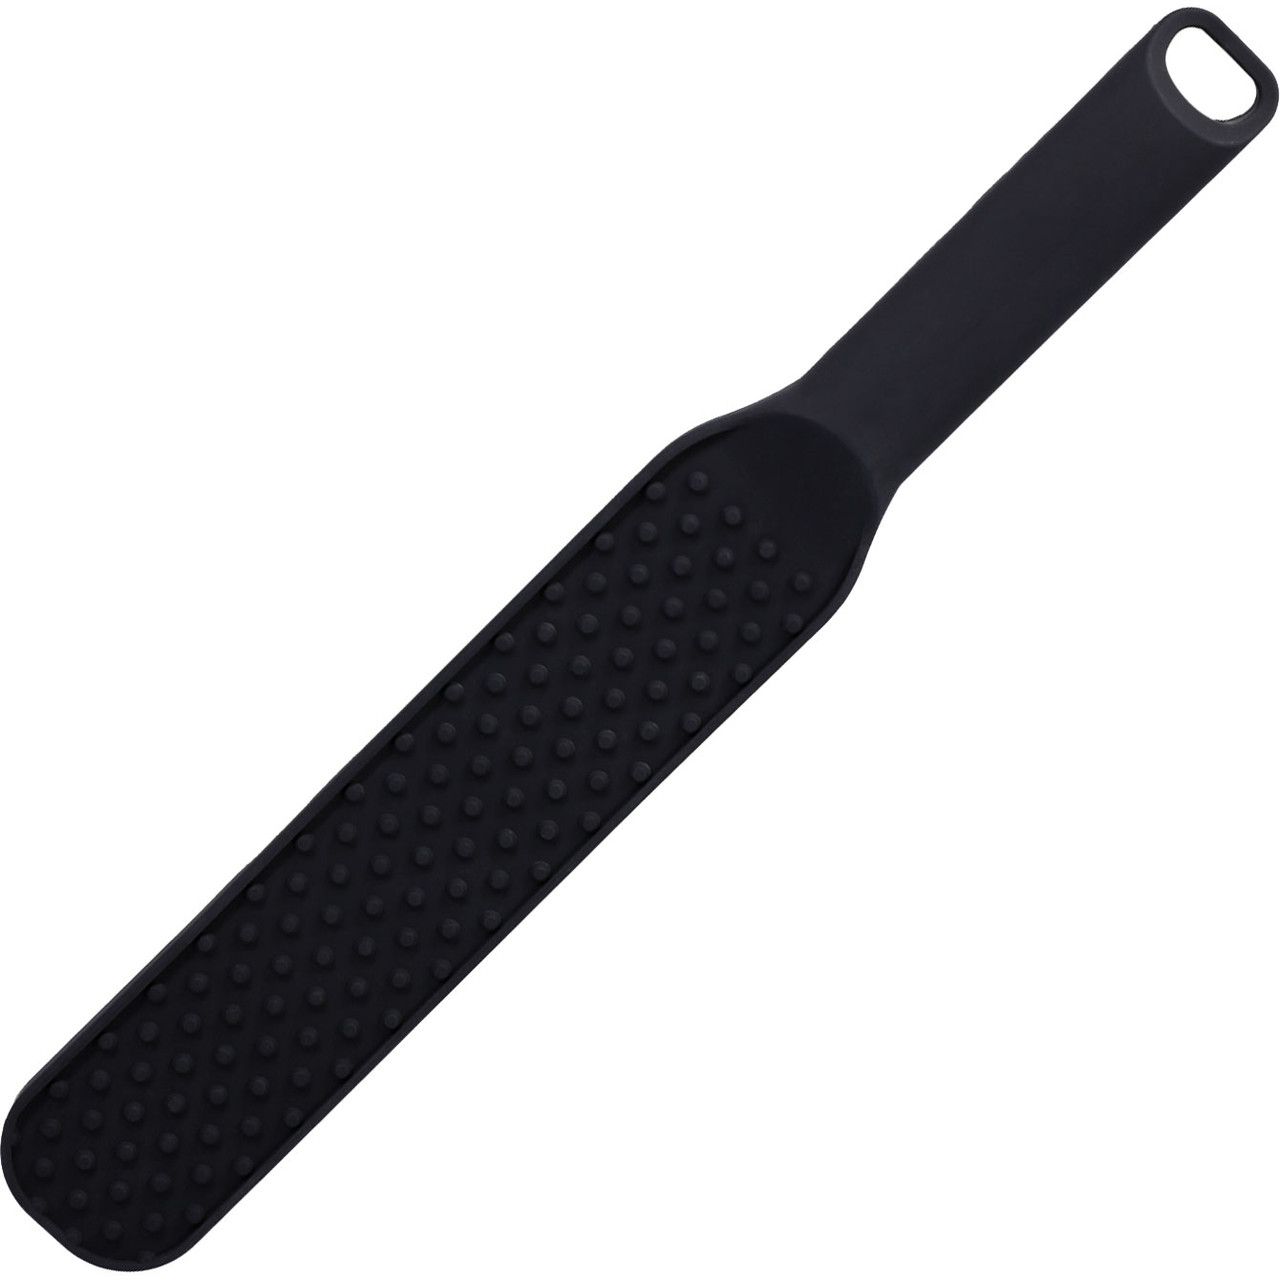 In A Bag Black Spanking Paddle By Doc Johnson